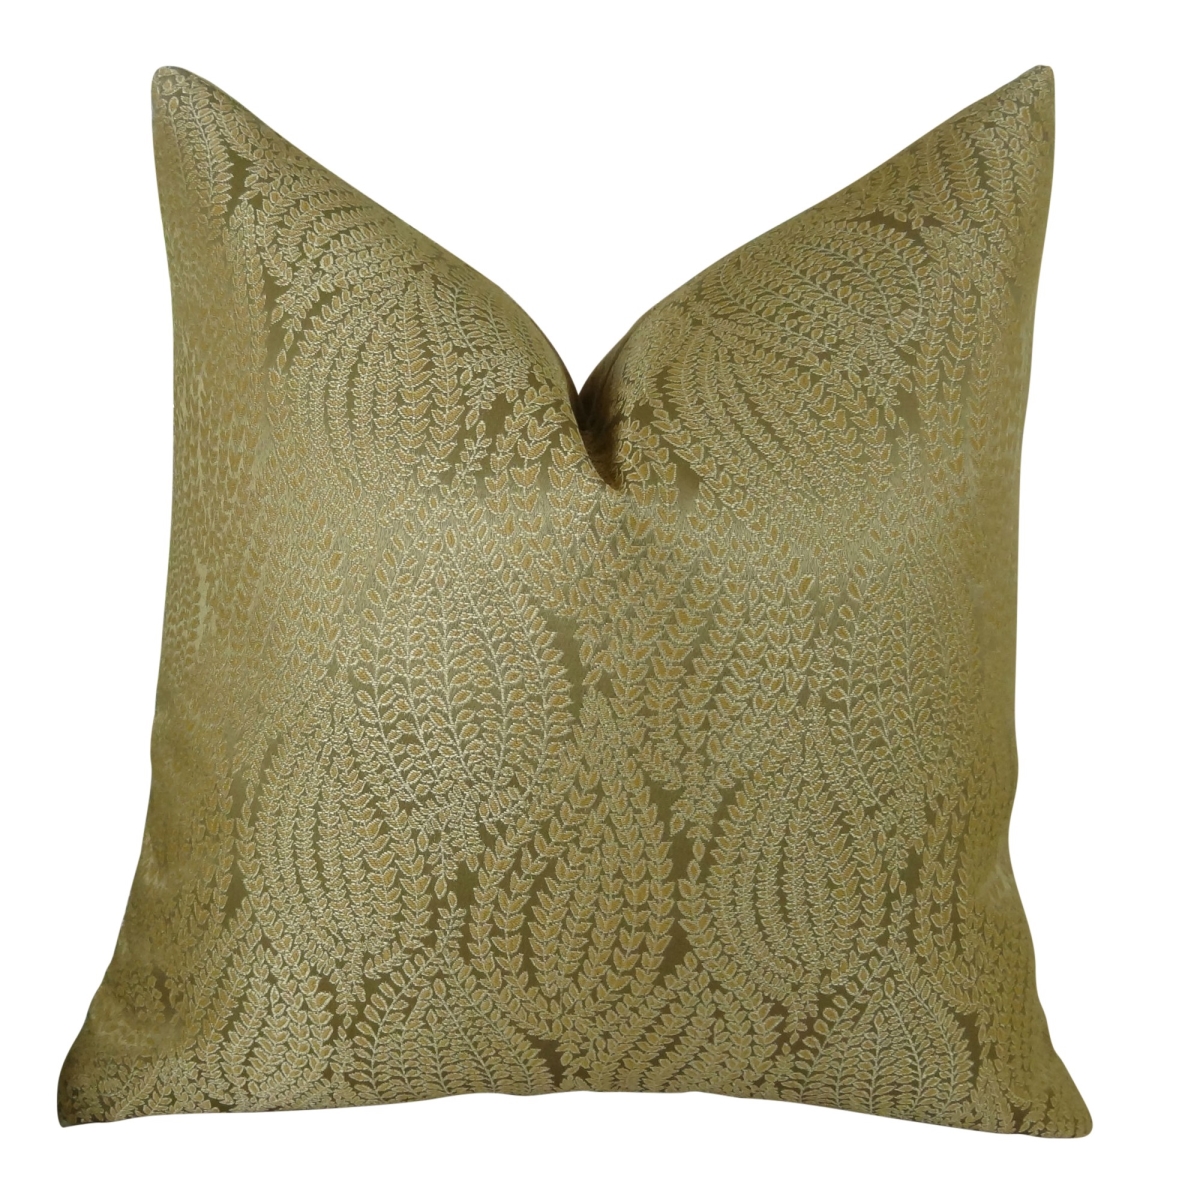 Pb11015-1220-dp Leaf Pod Handmade Double Sided Throw Pillow, Gold - 12 X 20 In.